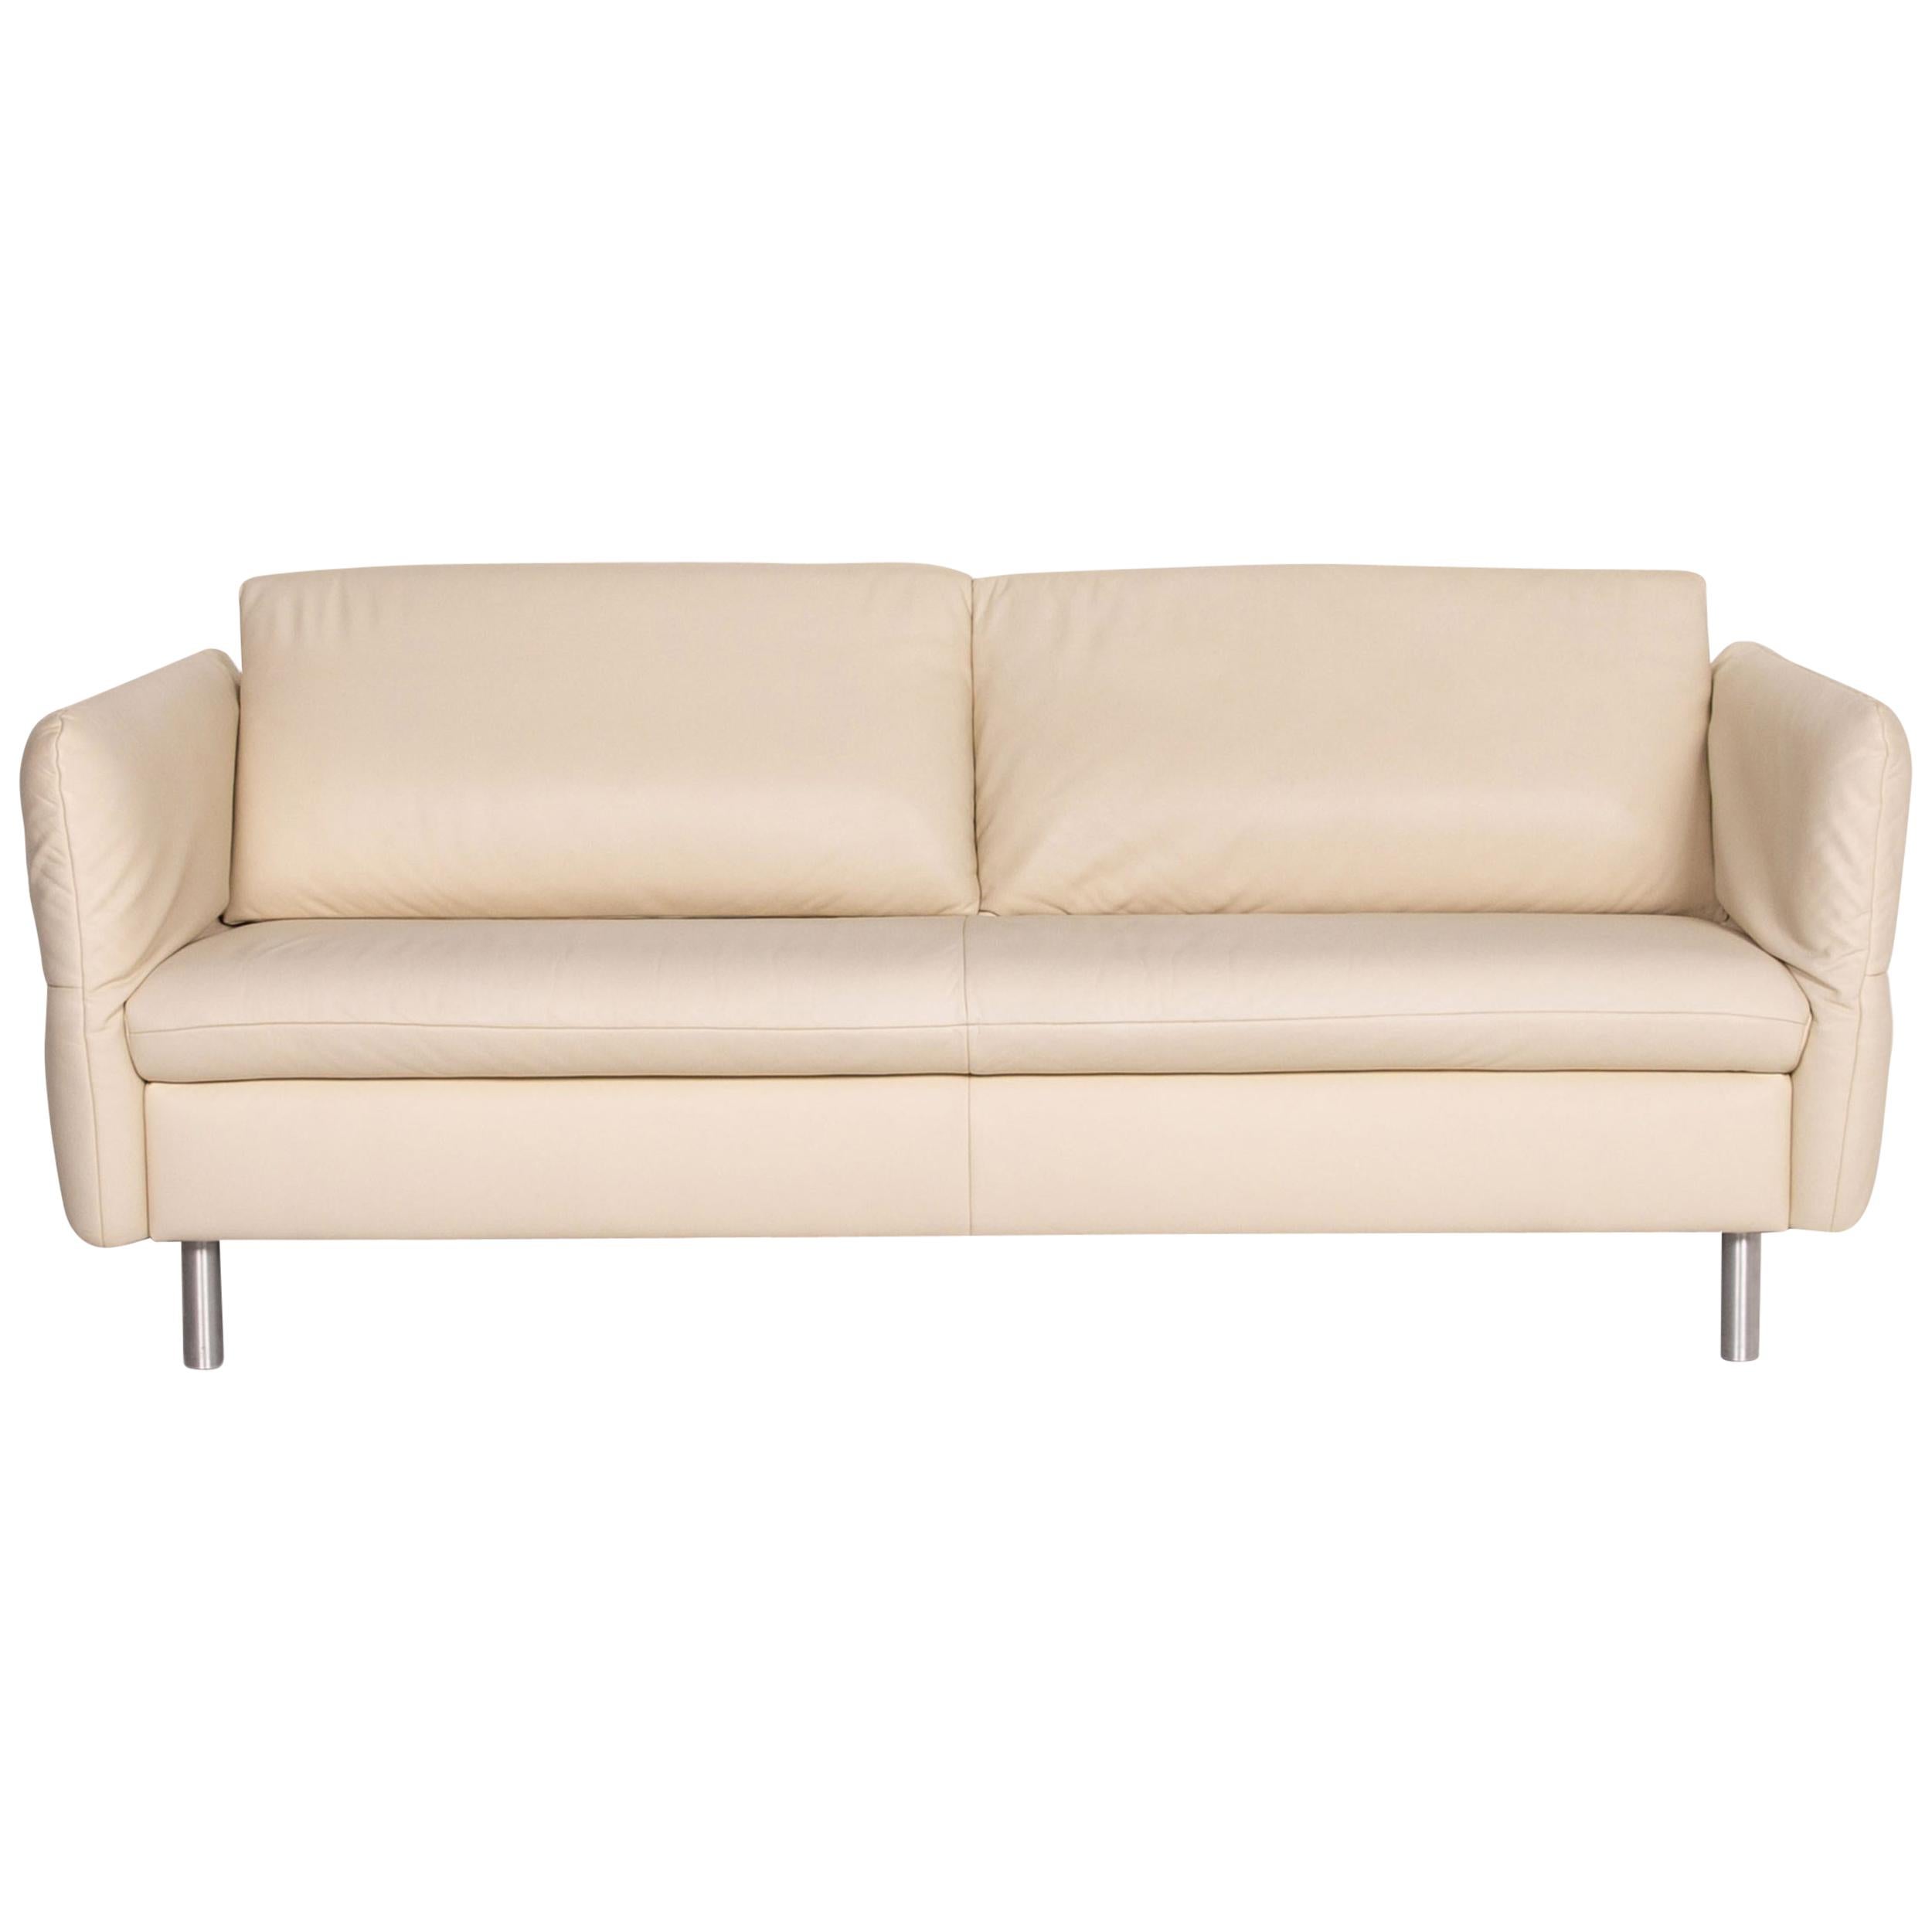 Koinor Vittoria Leather Sofa Cream Two-Seat Couch For Sale